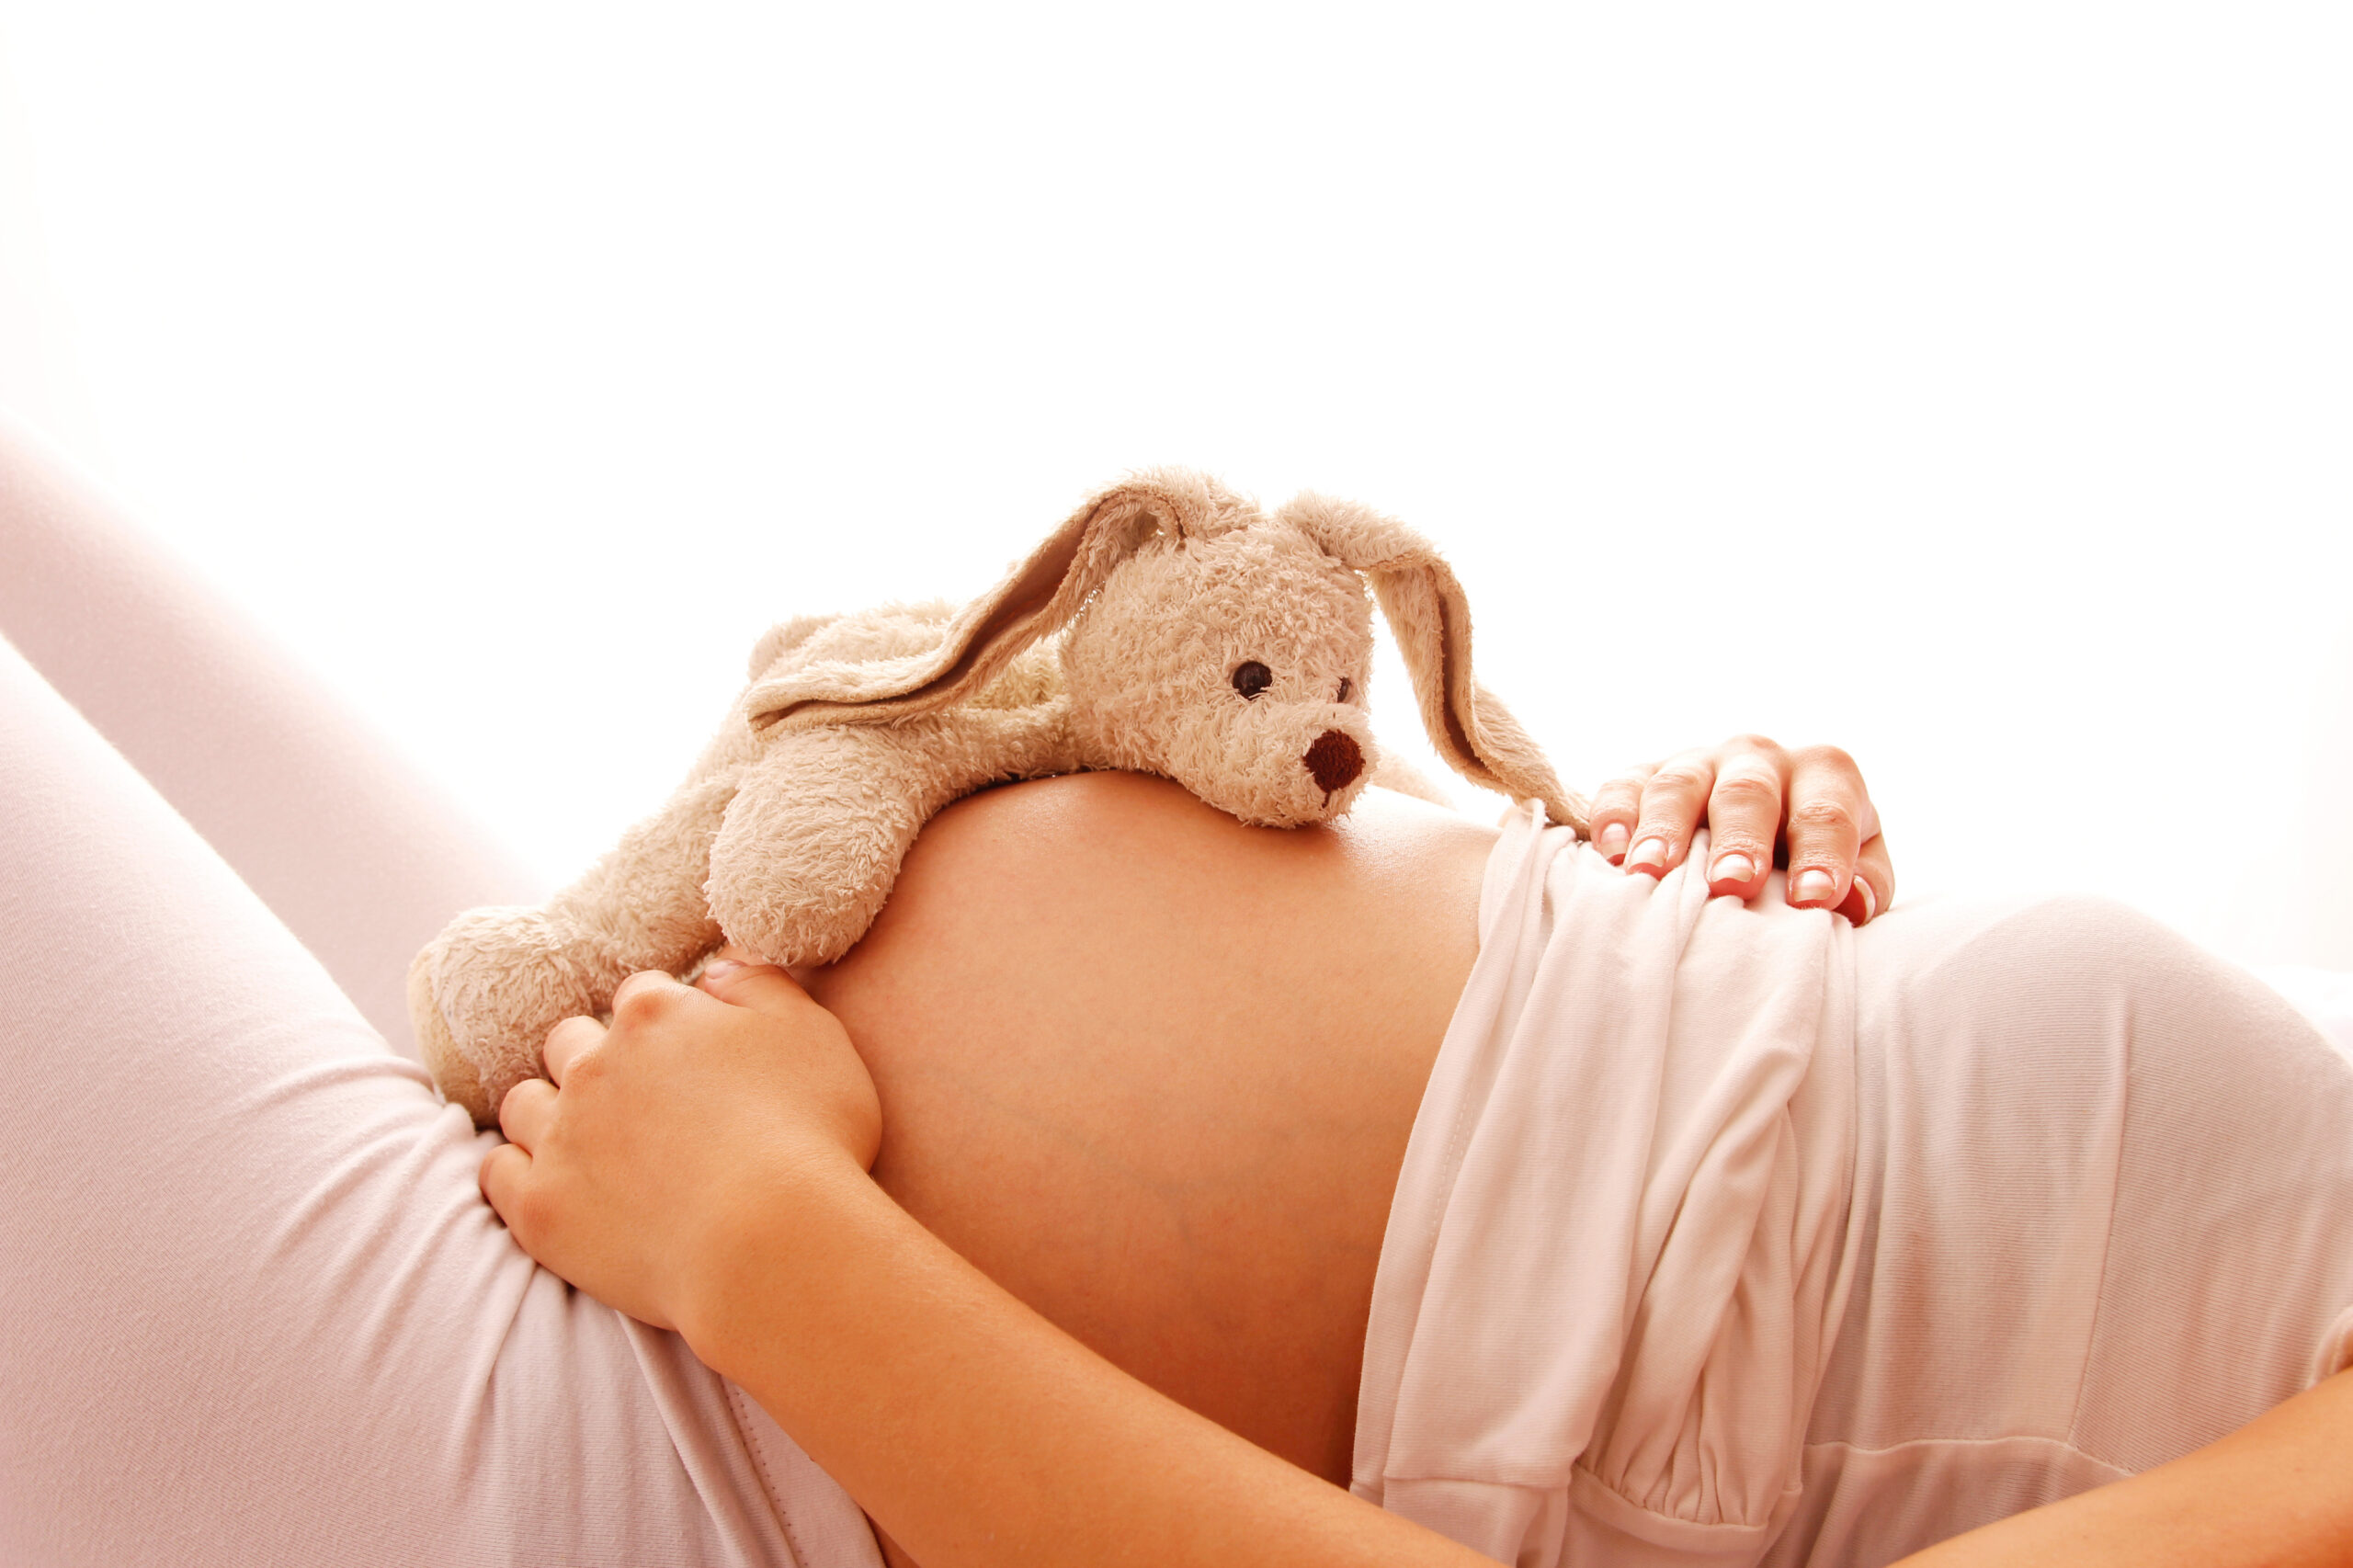 Pregnant woman lying down with a stuffed bunny resting on her belly.